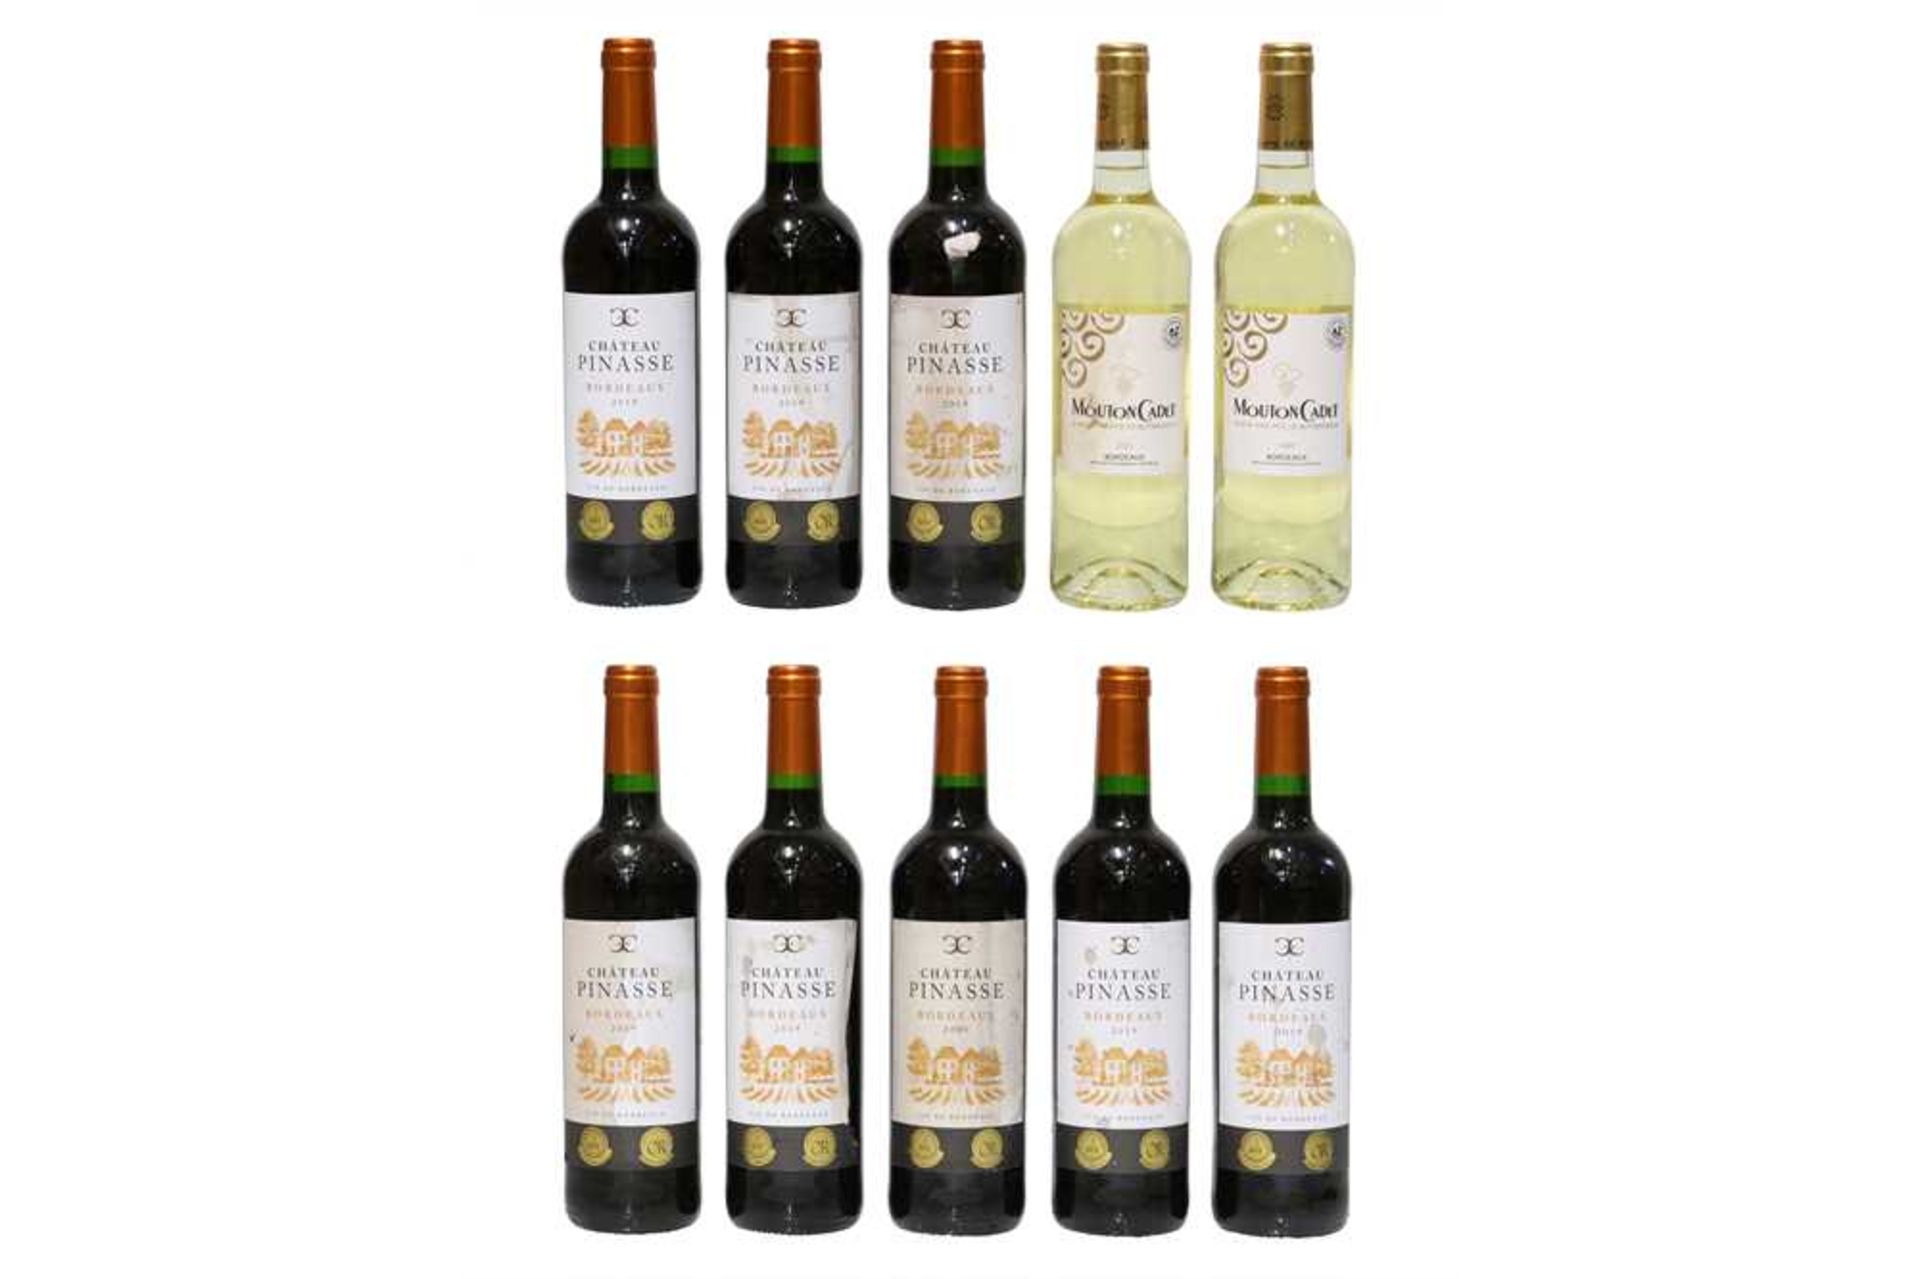 Red and White Bordeaux: Chateau Pinasse 2019 and Mouton Cadet Blanc 2021, ten bottles total